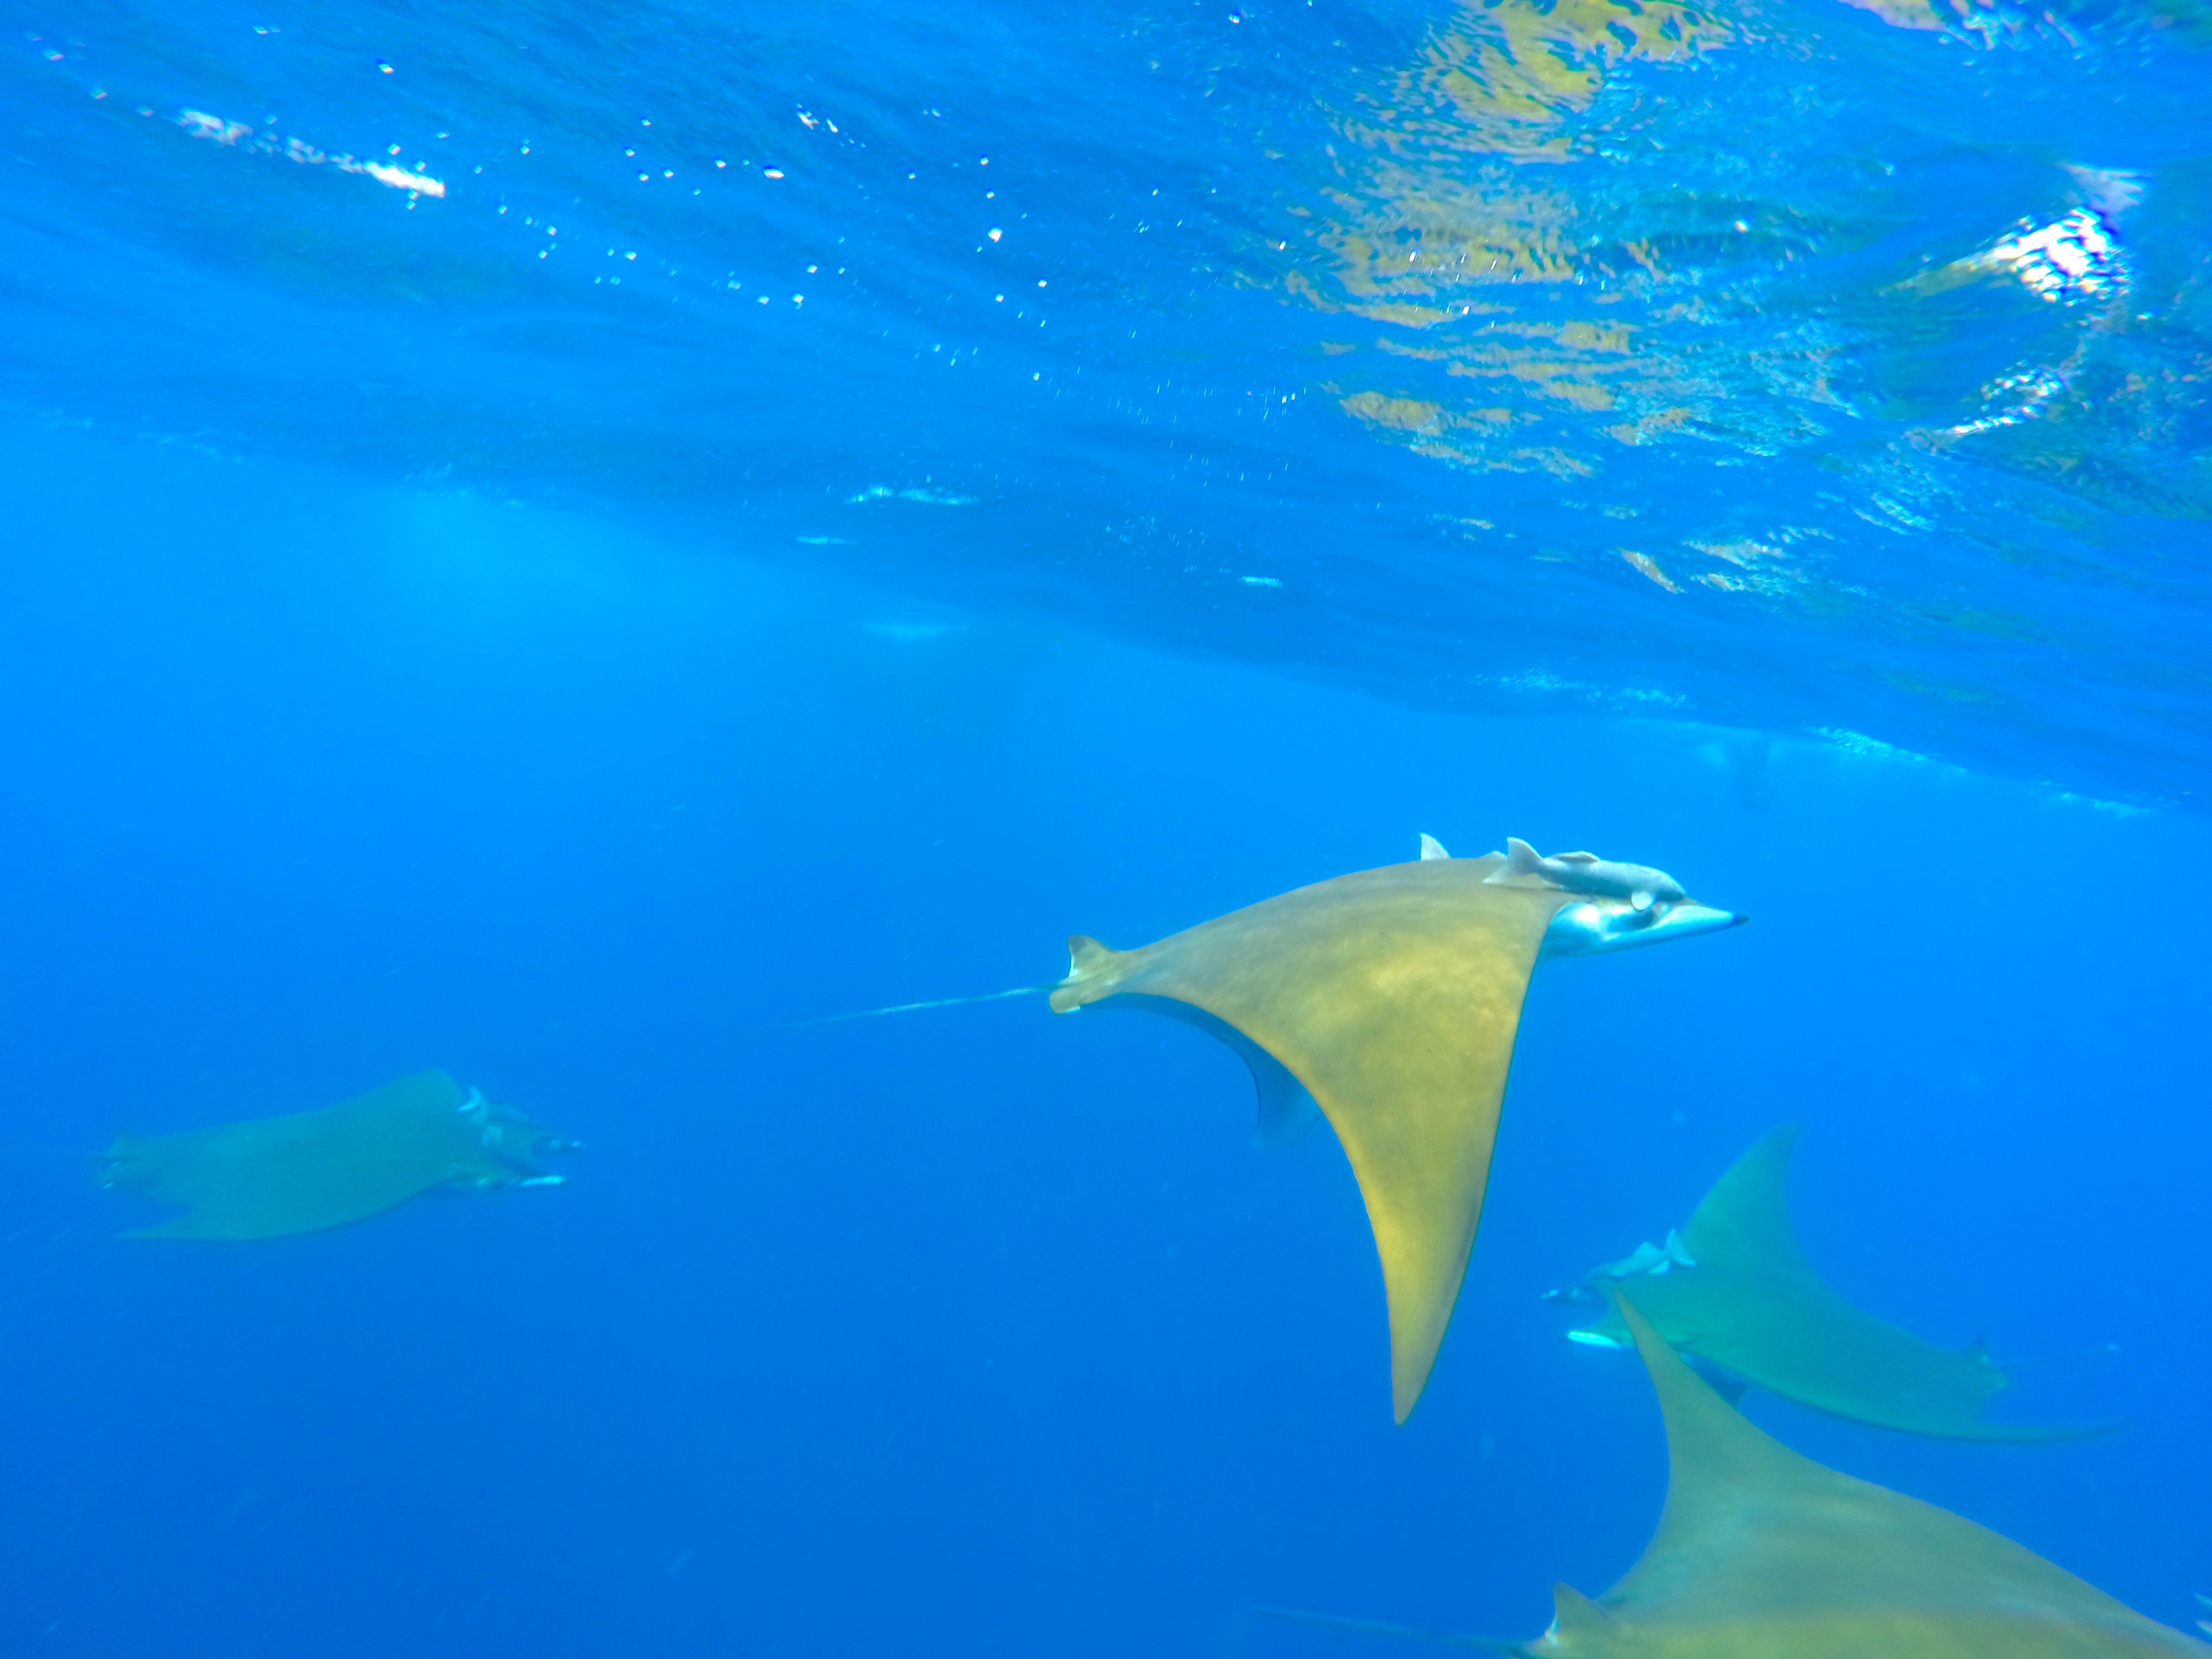 Chilean devil rays, Mobula tarapacana are gentle and curious creatures that often come extremely close to us while we are free diving. 